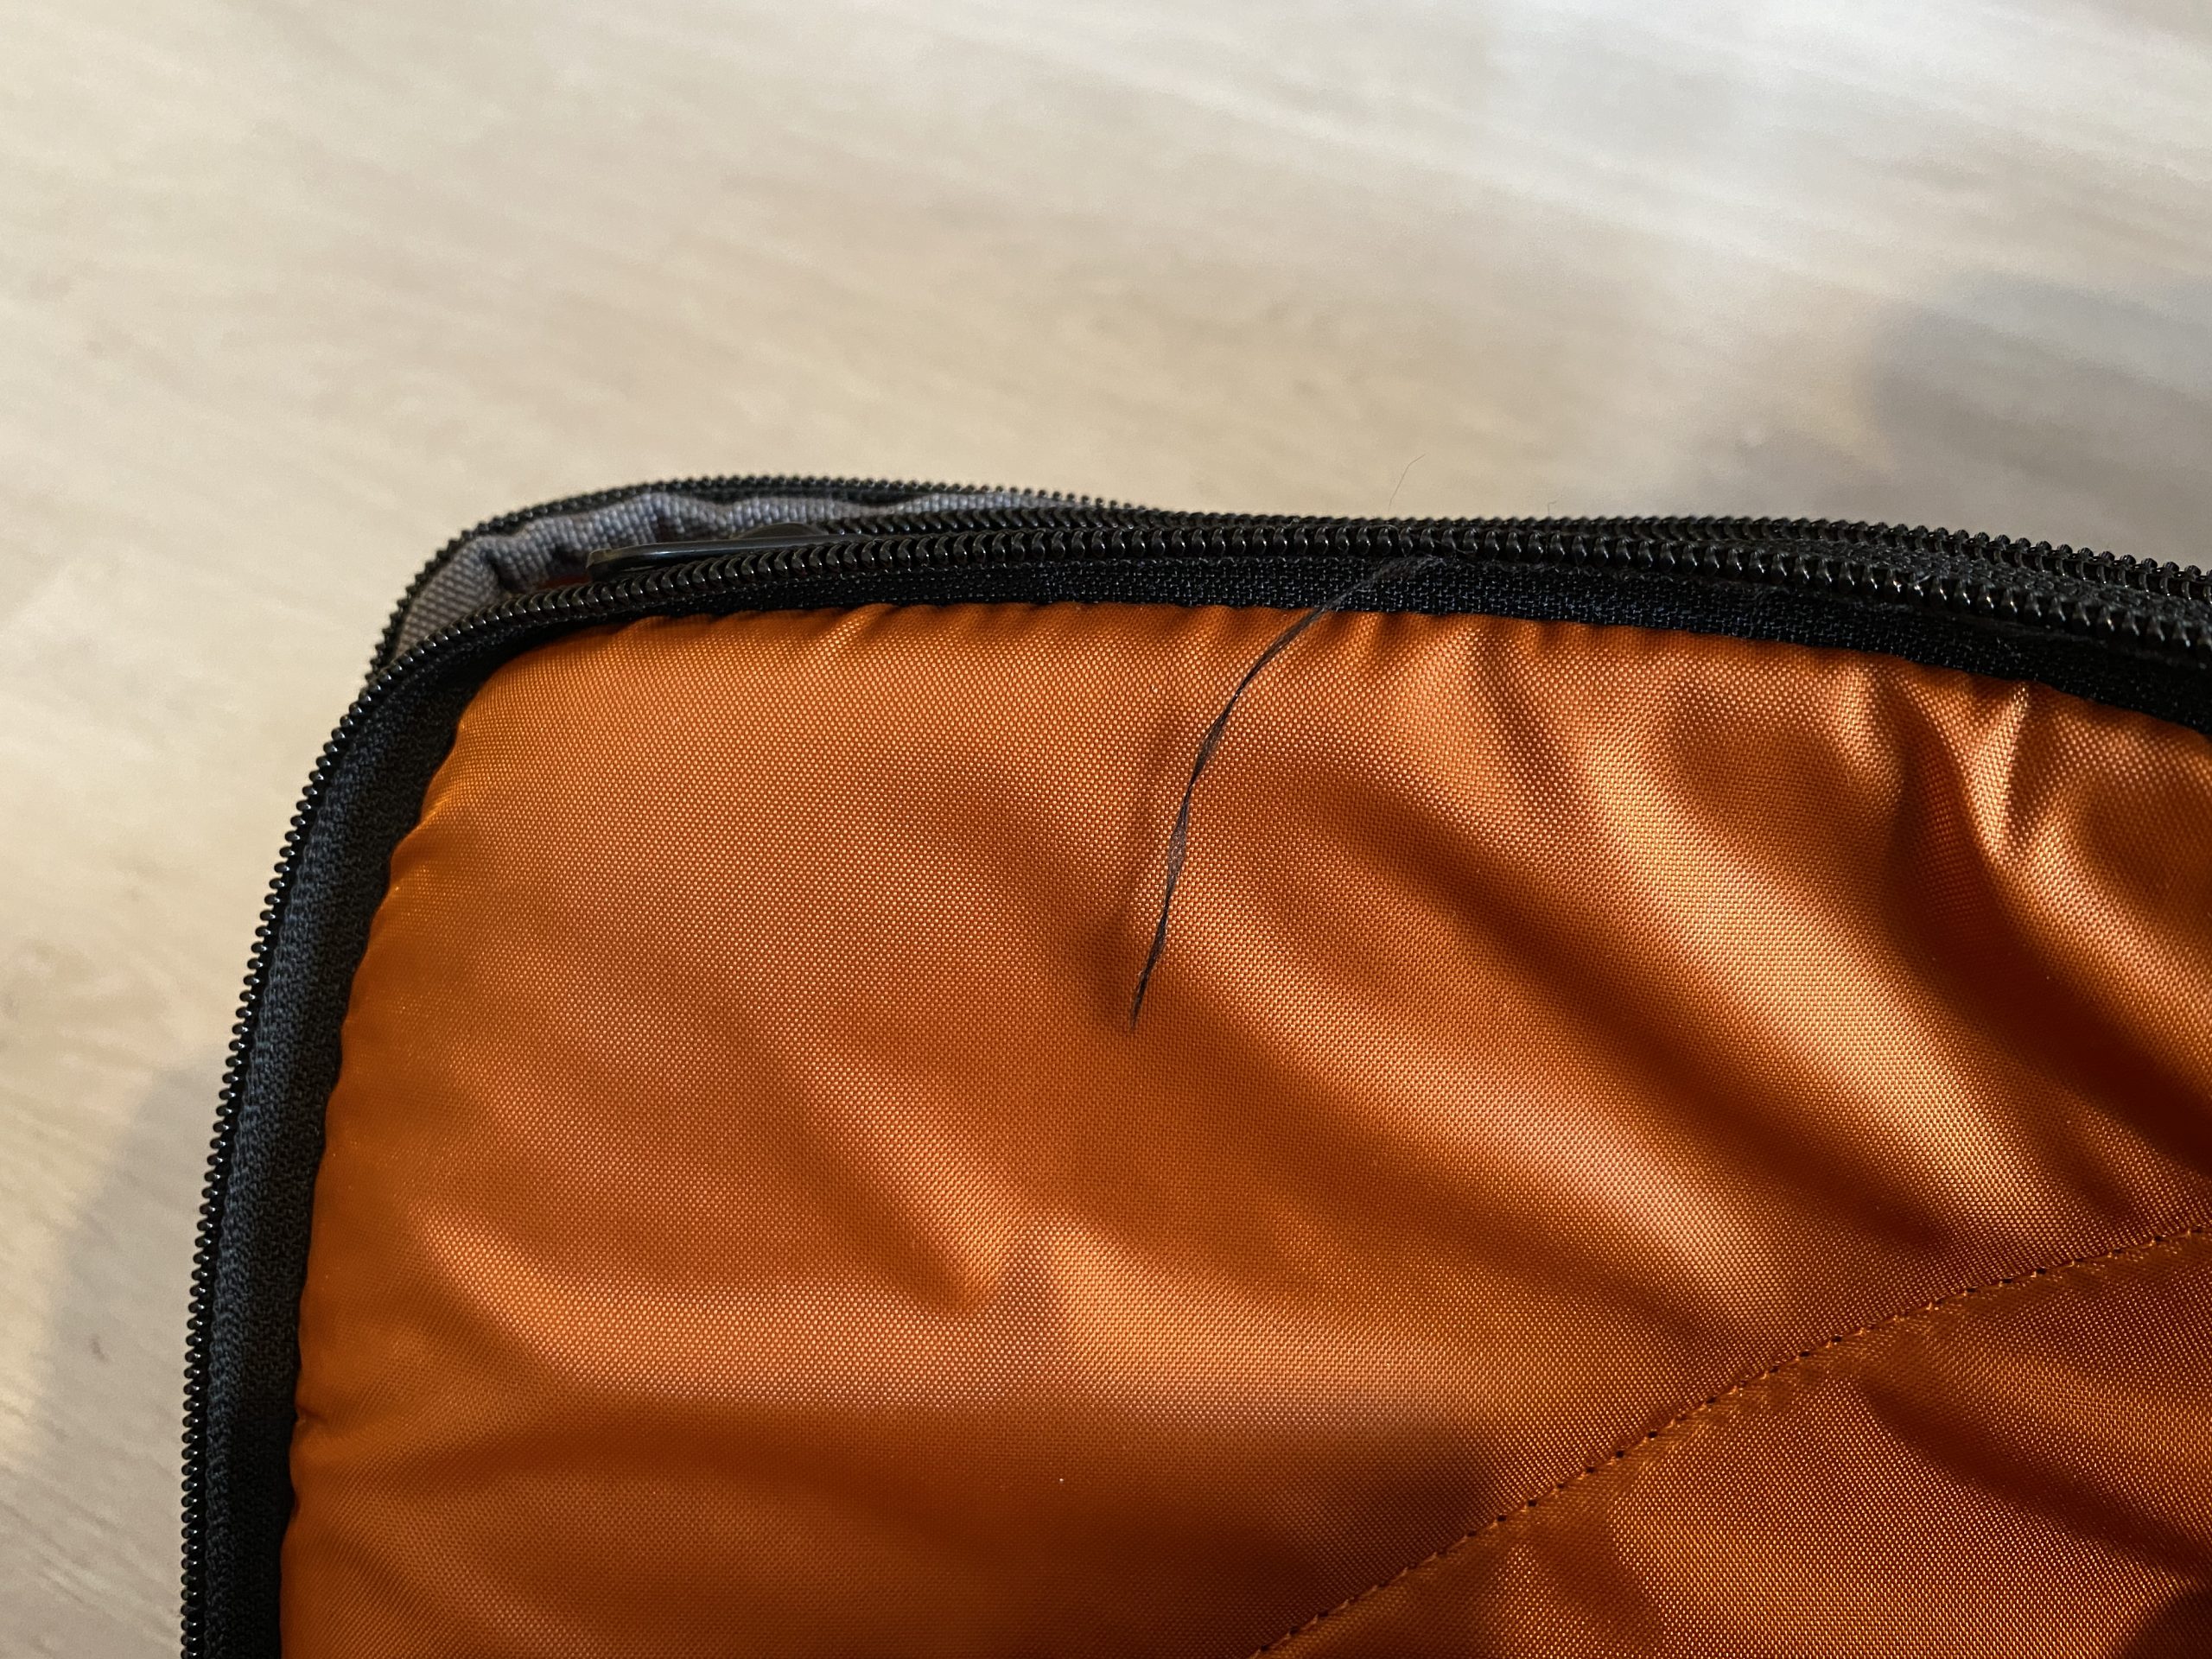 eBags Pro Slim Laptop Backpack Loose Threads Review